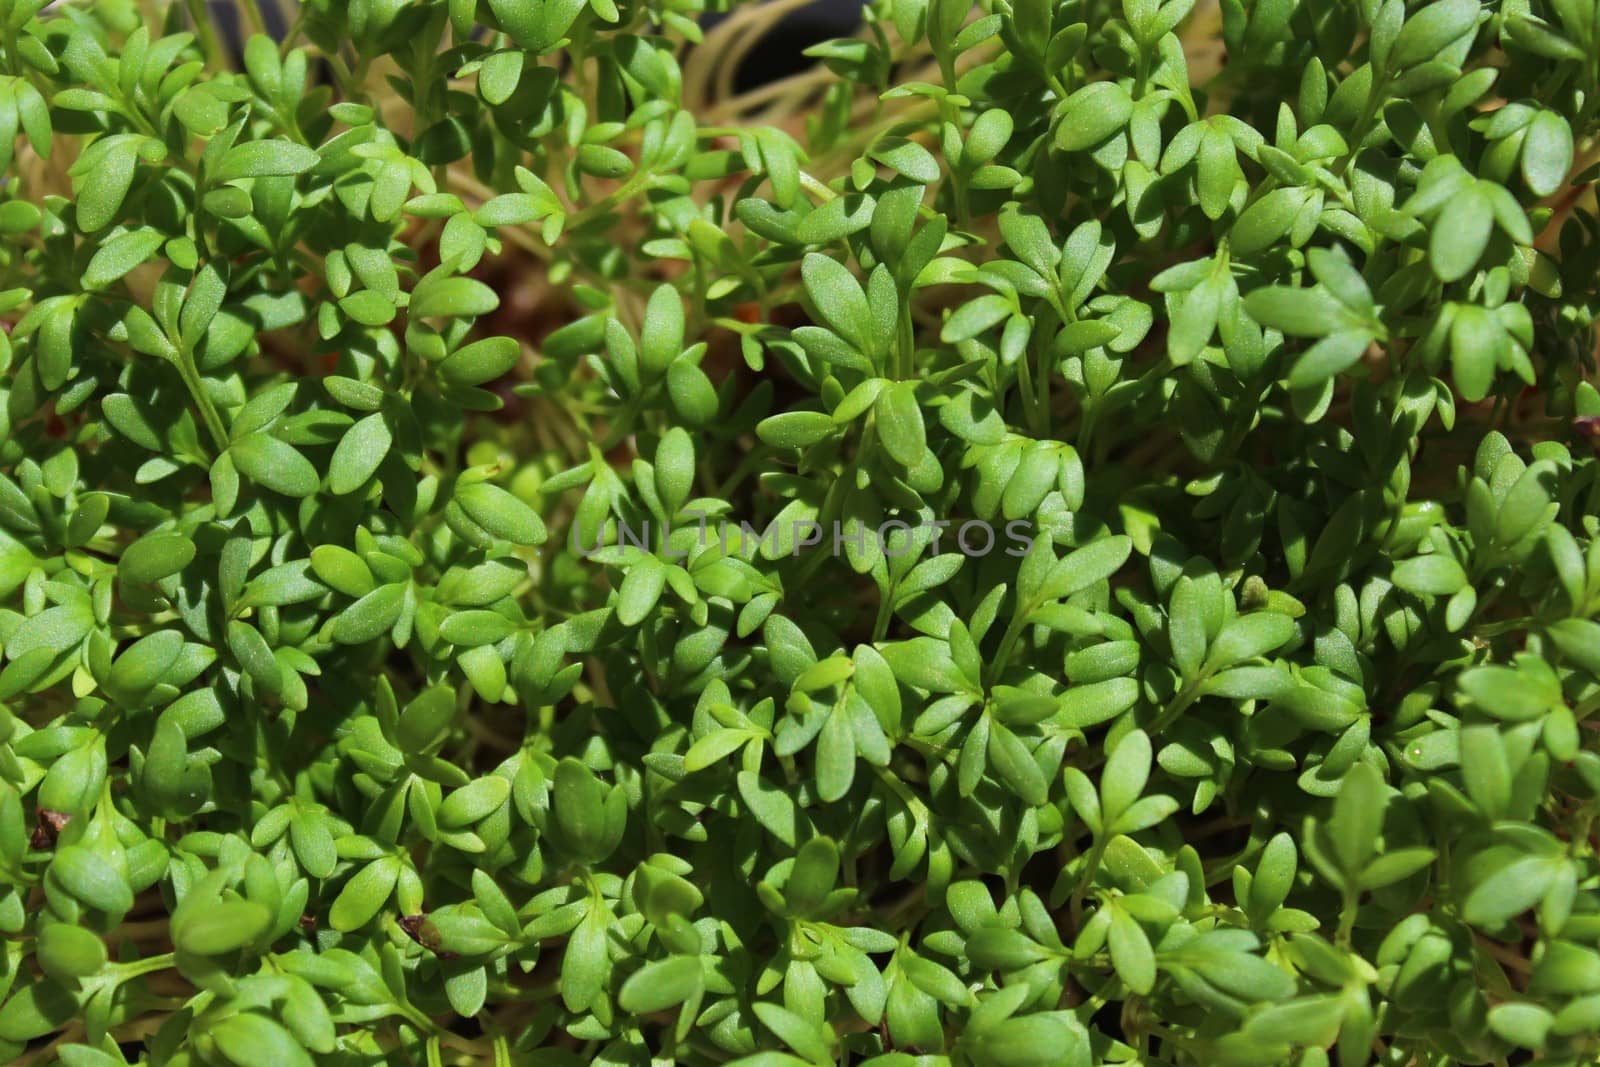 The picture shows a background with fresh cress